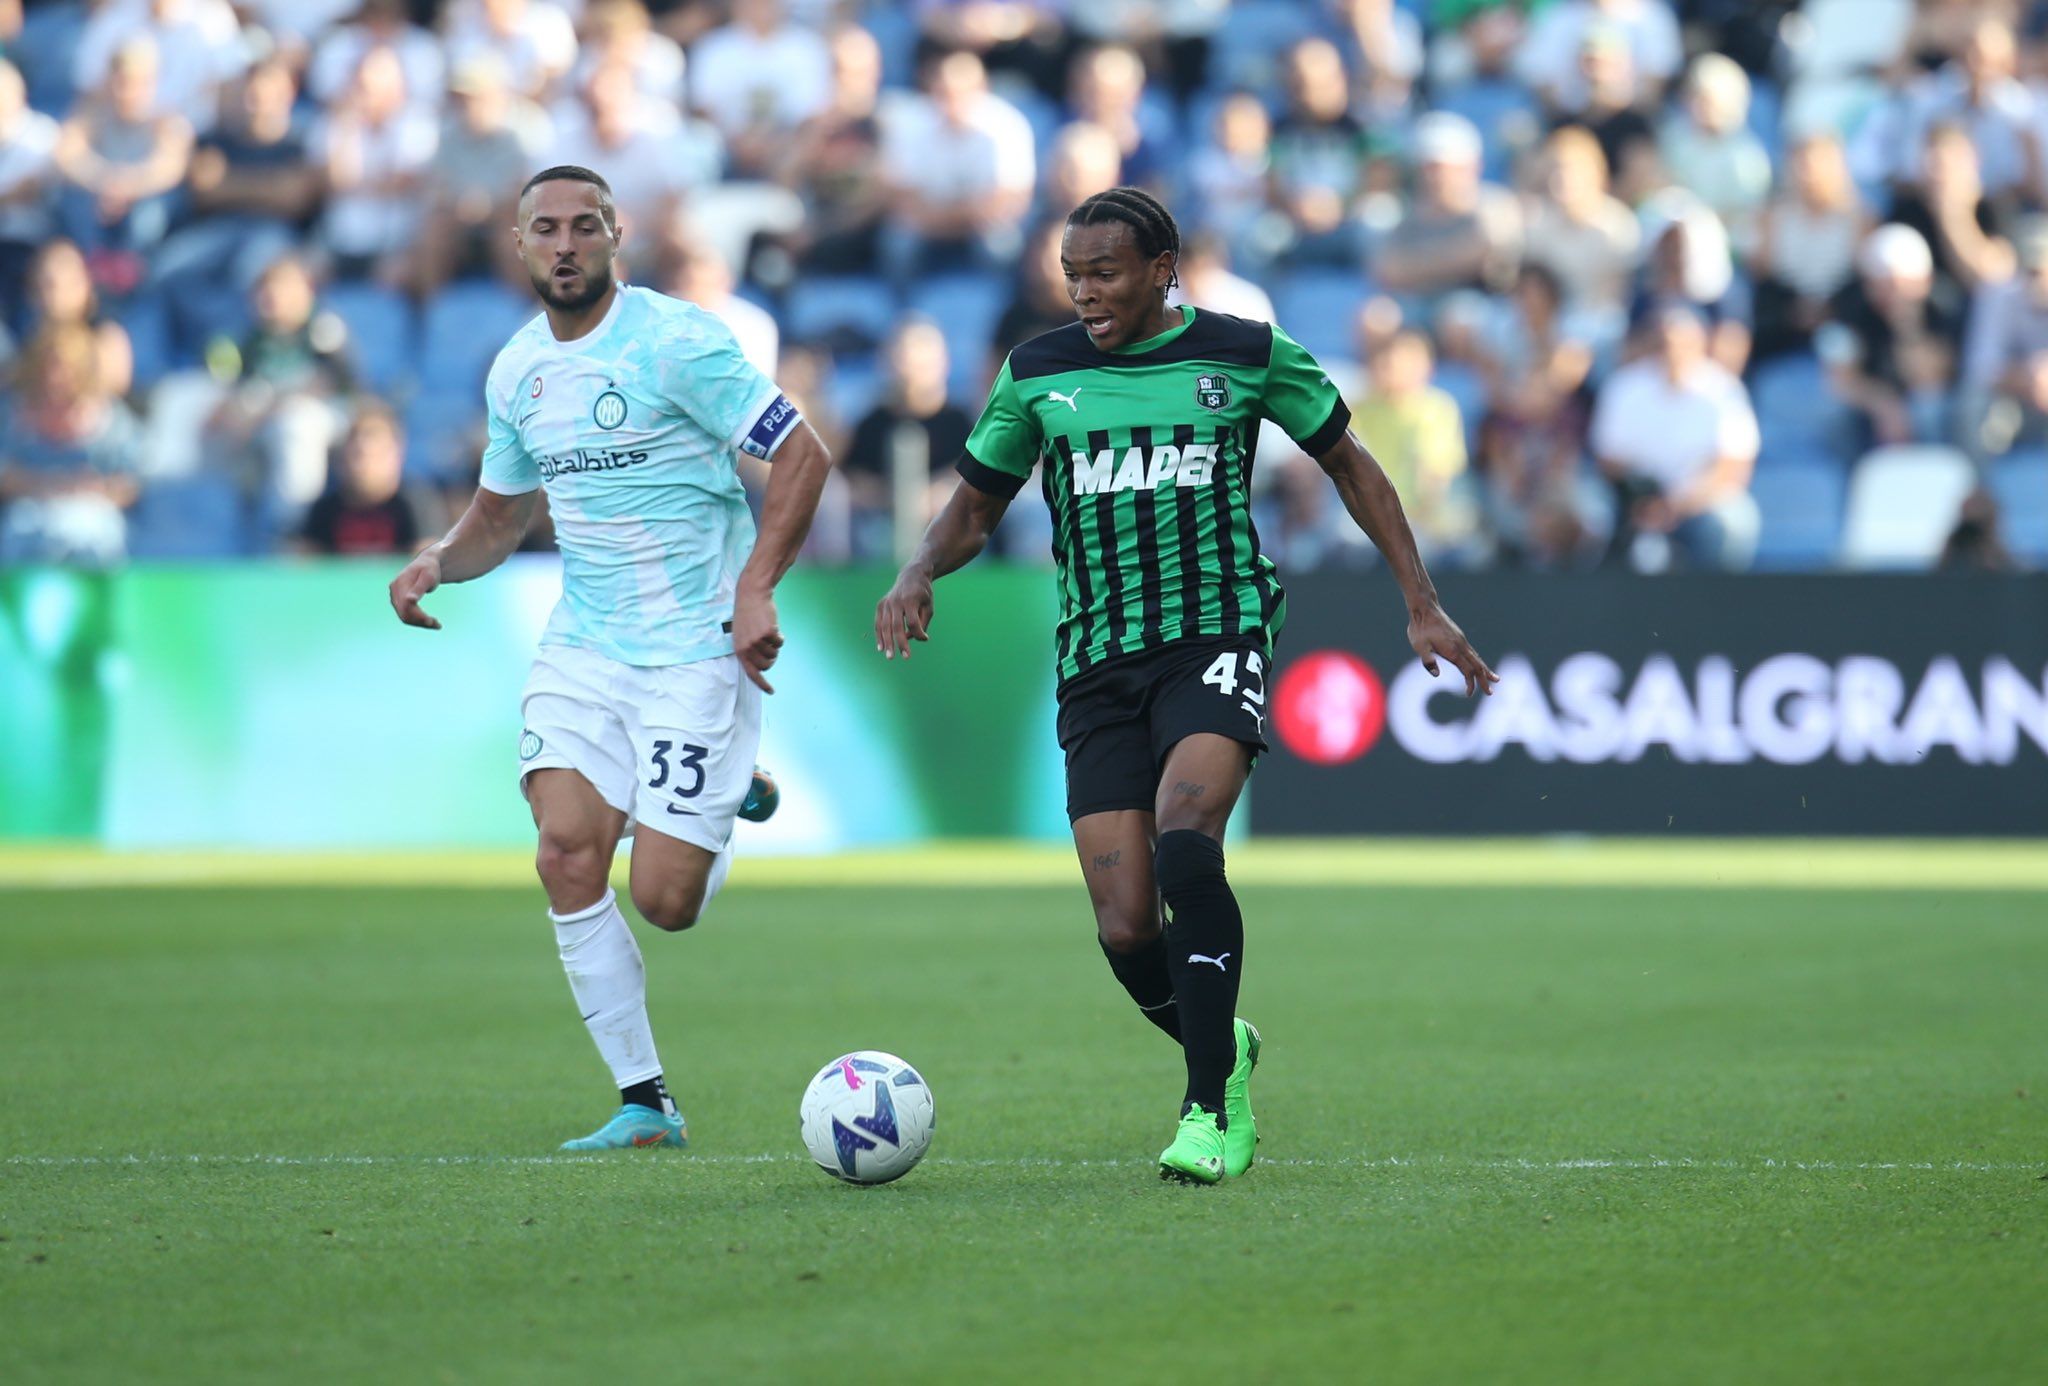 Sassuolo vs Hellas Verona: Prediction, Odds, Betting Tips, and How to Watch | 24/10/2022